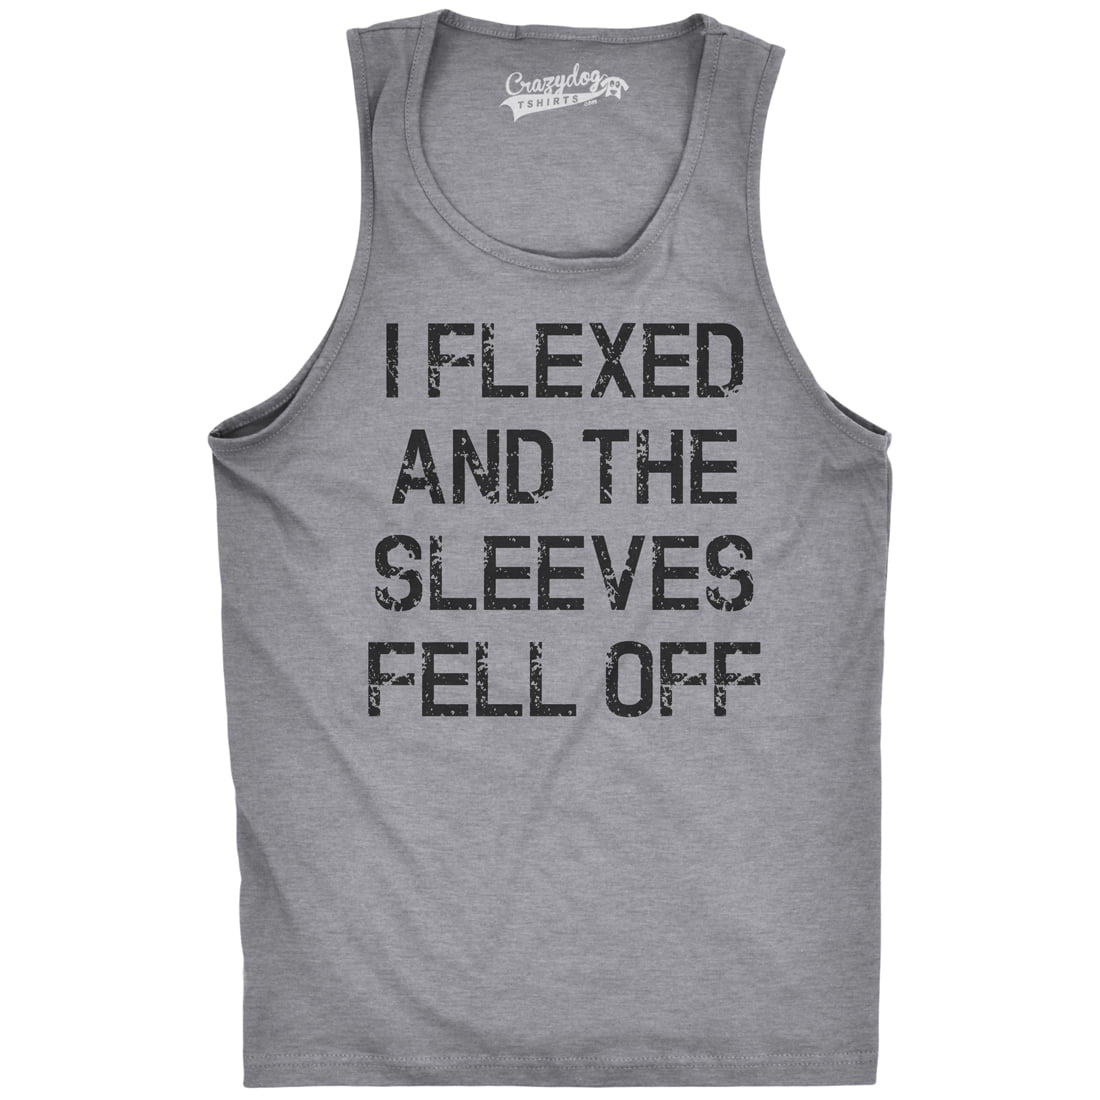 I Flexed And The Sleeves Fell Off Adult Graphic Unisex Tank Tops T-Shirt Tee 